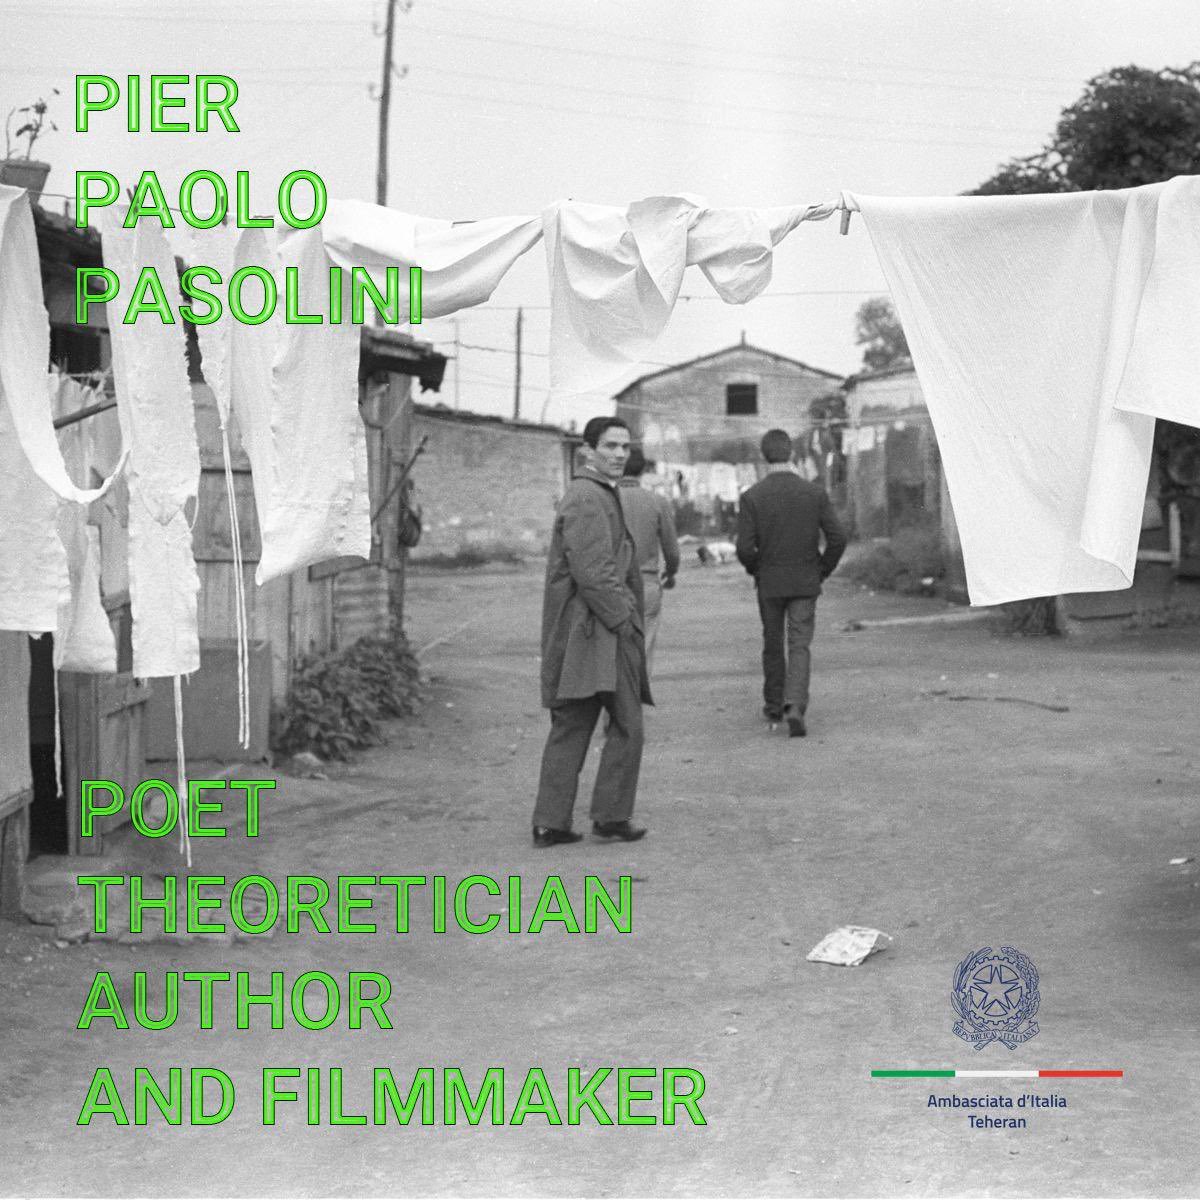 Introducing today, at @Assafir_Perrone’s residence, the new festival “Pier Paolo Pasolini. Poet, Theoretician, Author and Filmmaker”, featuring some of Pasolini’s iconic films & groundbreaking documentaries and highlighting his visionary and immortal legacy.